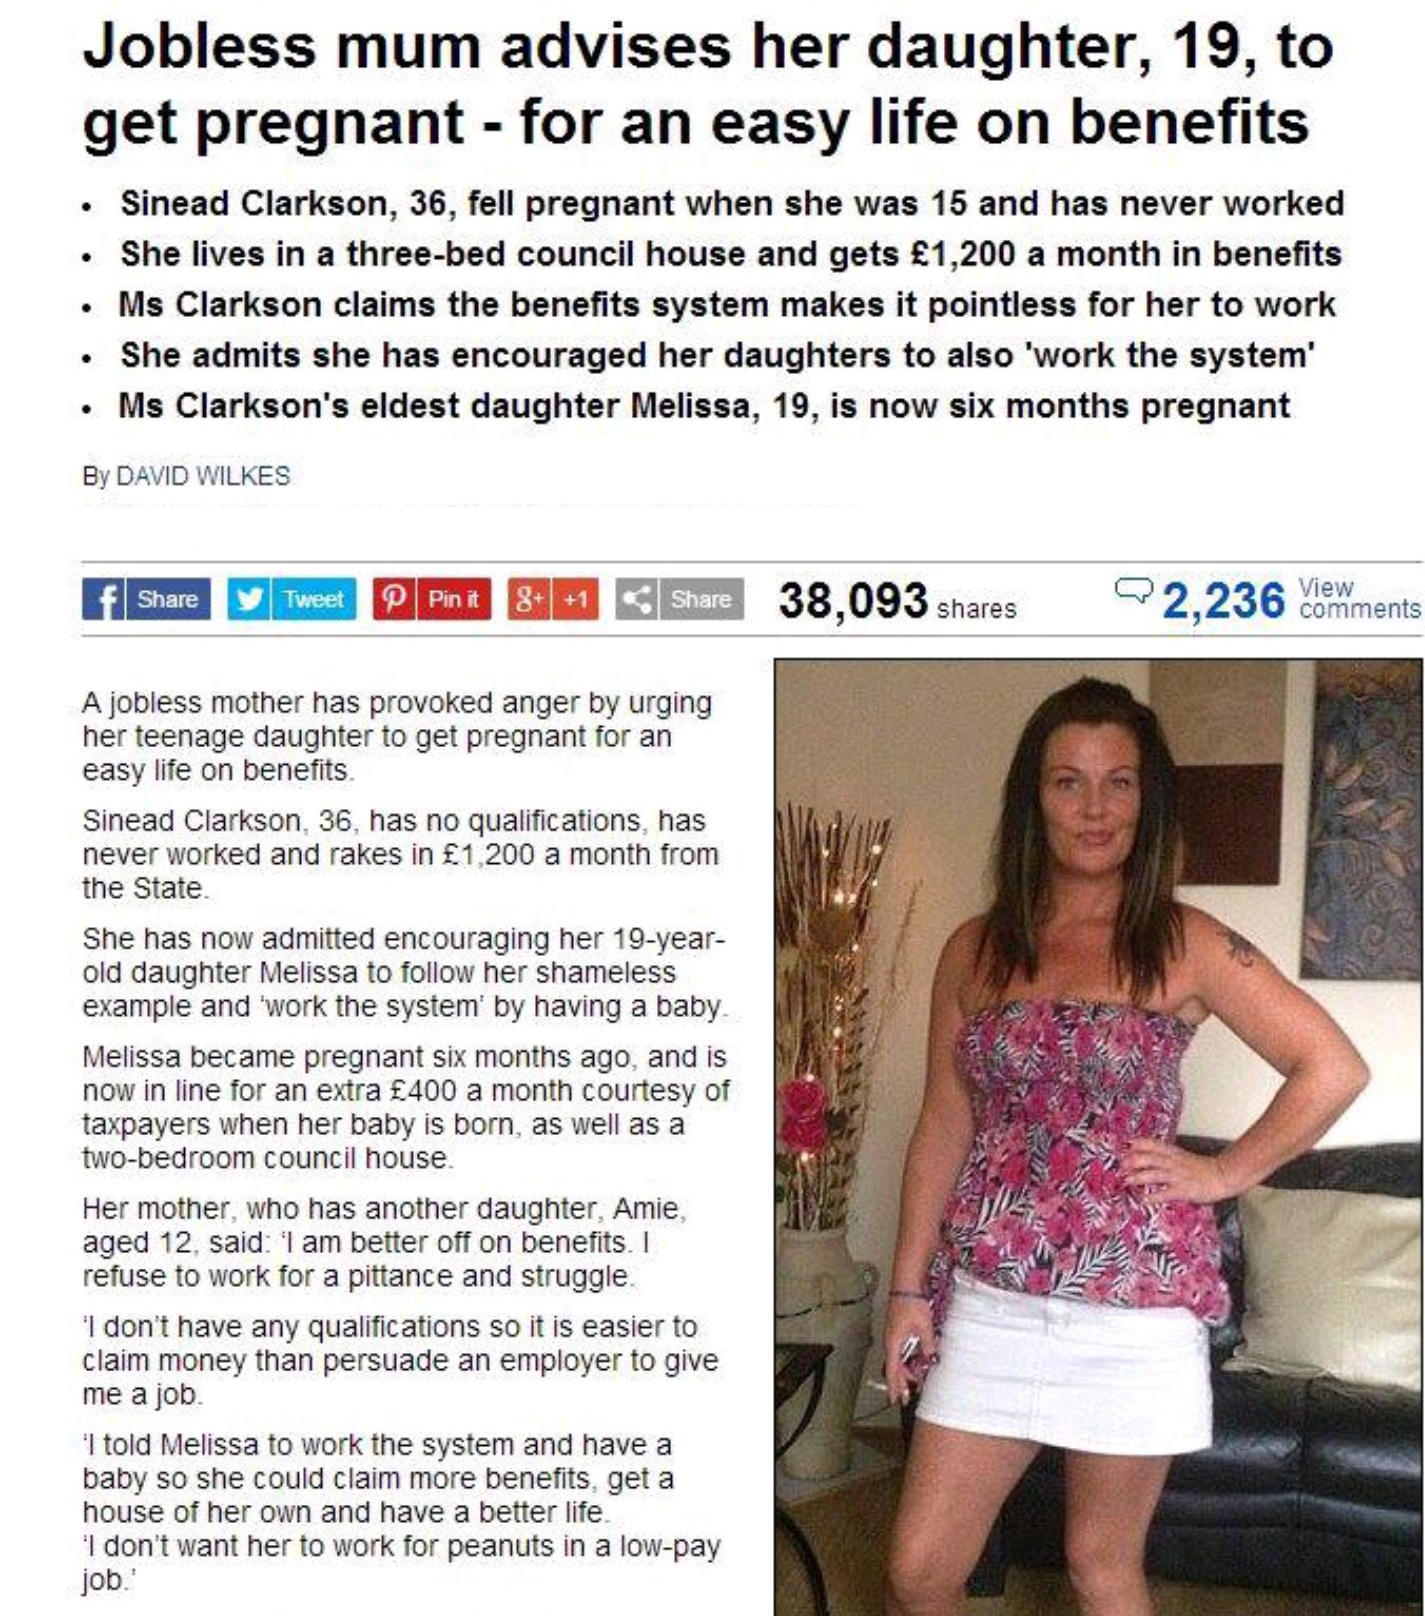 Jobless mum advises her daughter, 19, to get pregnant - for an easy life on benefits